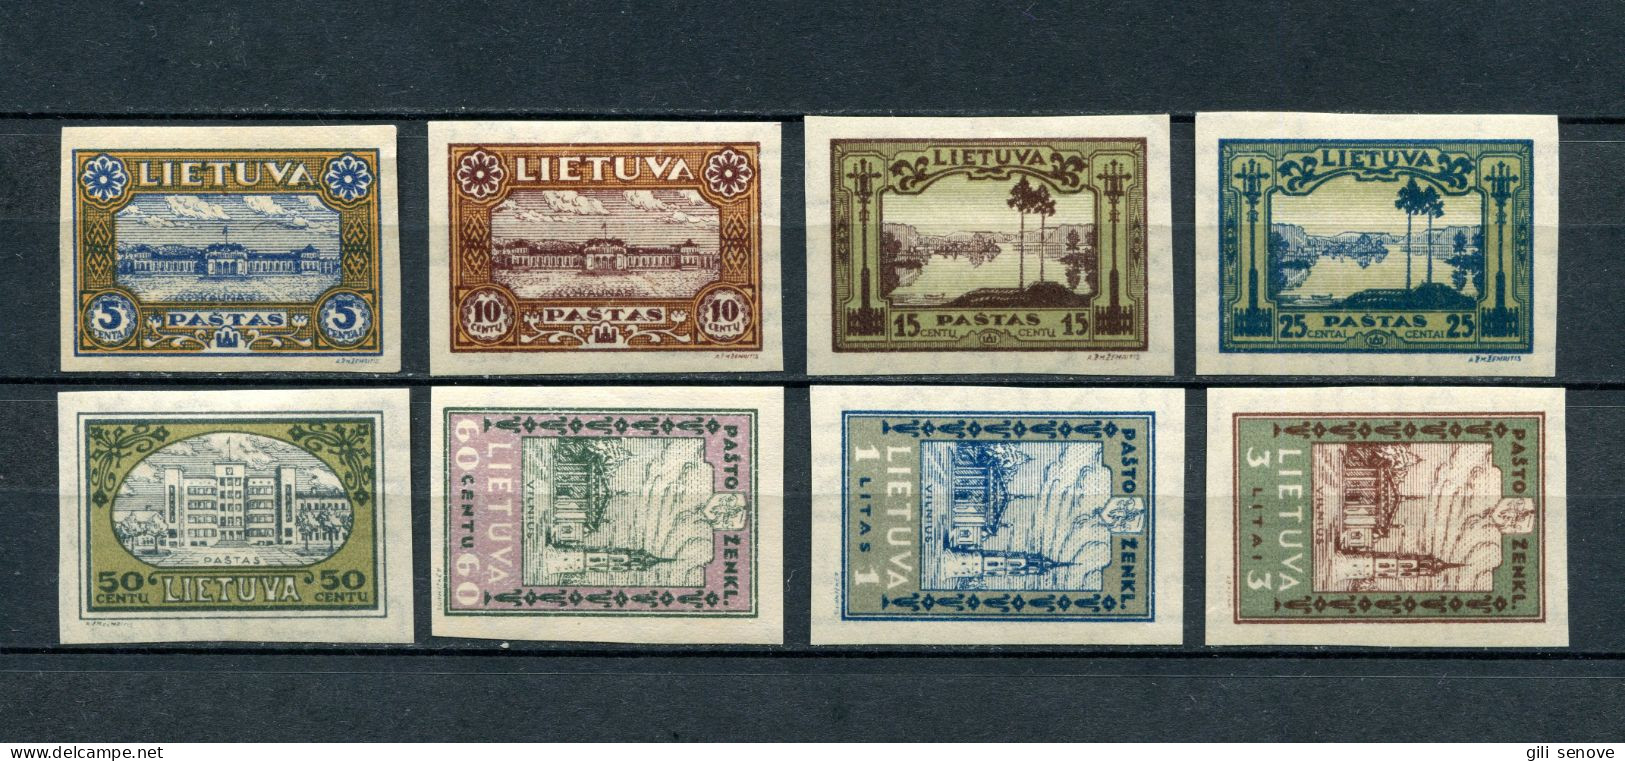 Lithuania 1932 Mi. 316B-323B Sc 256a –263a Lithuanian Scenes Imperforated MH* - Litauen